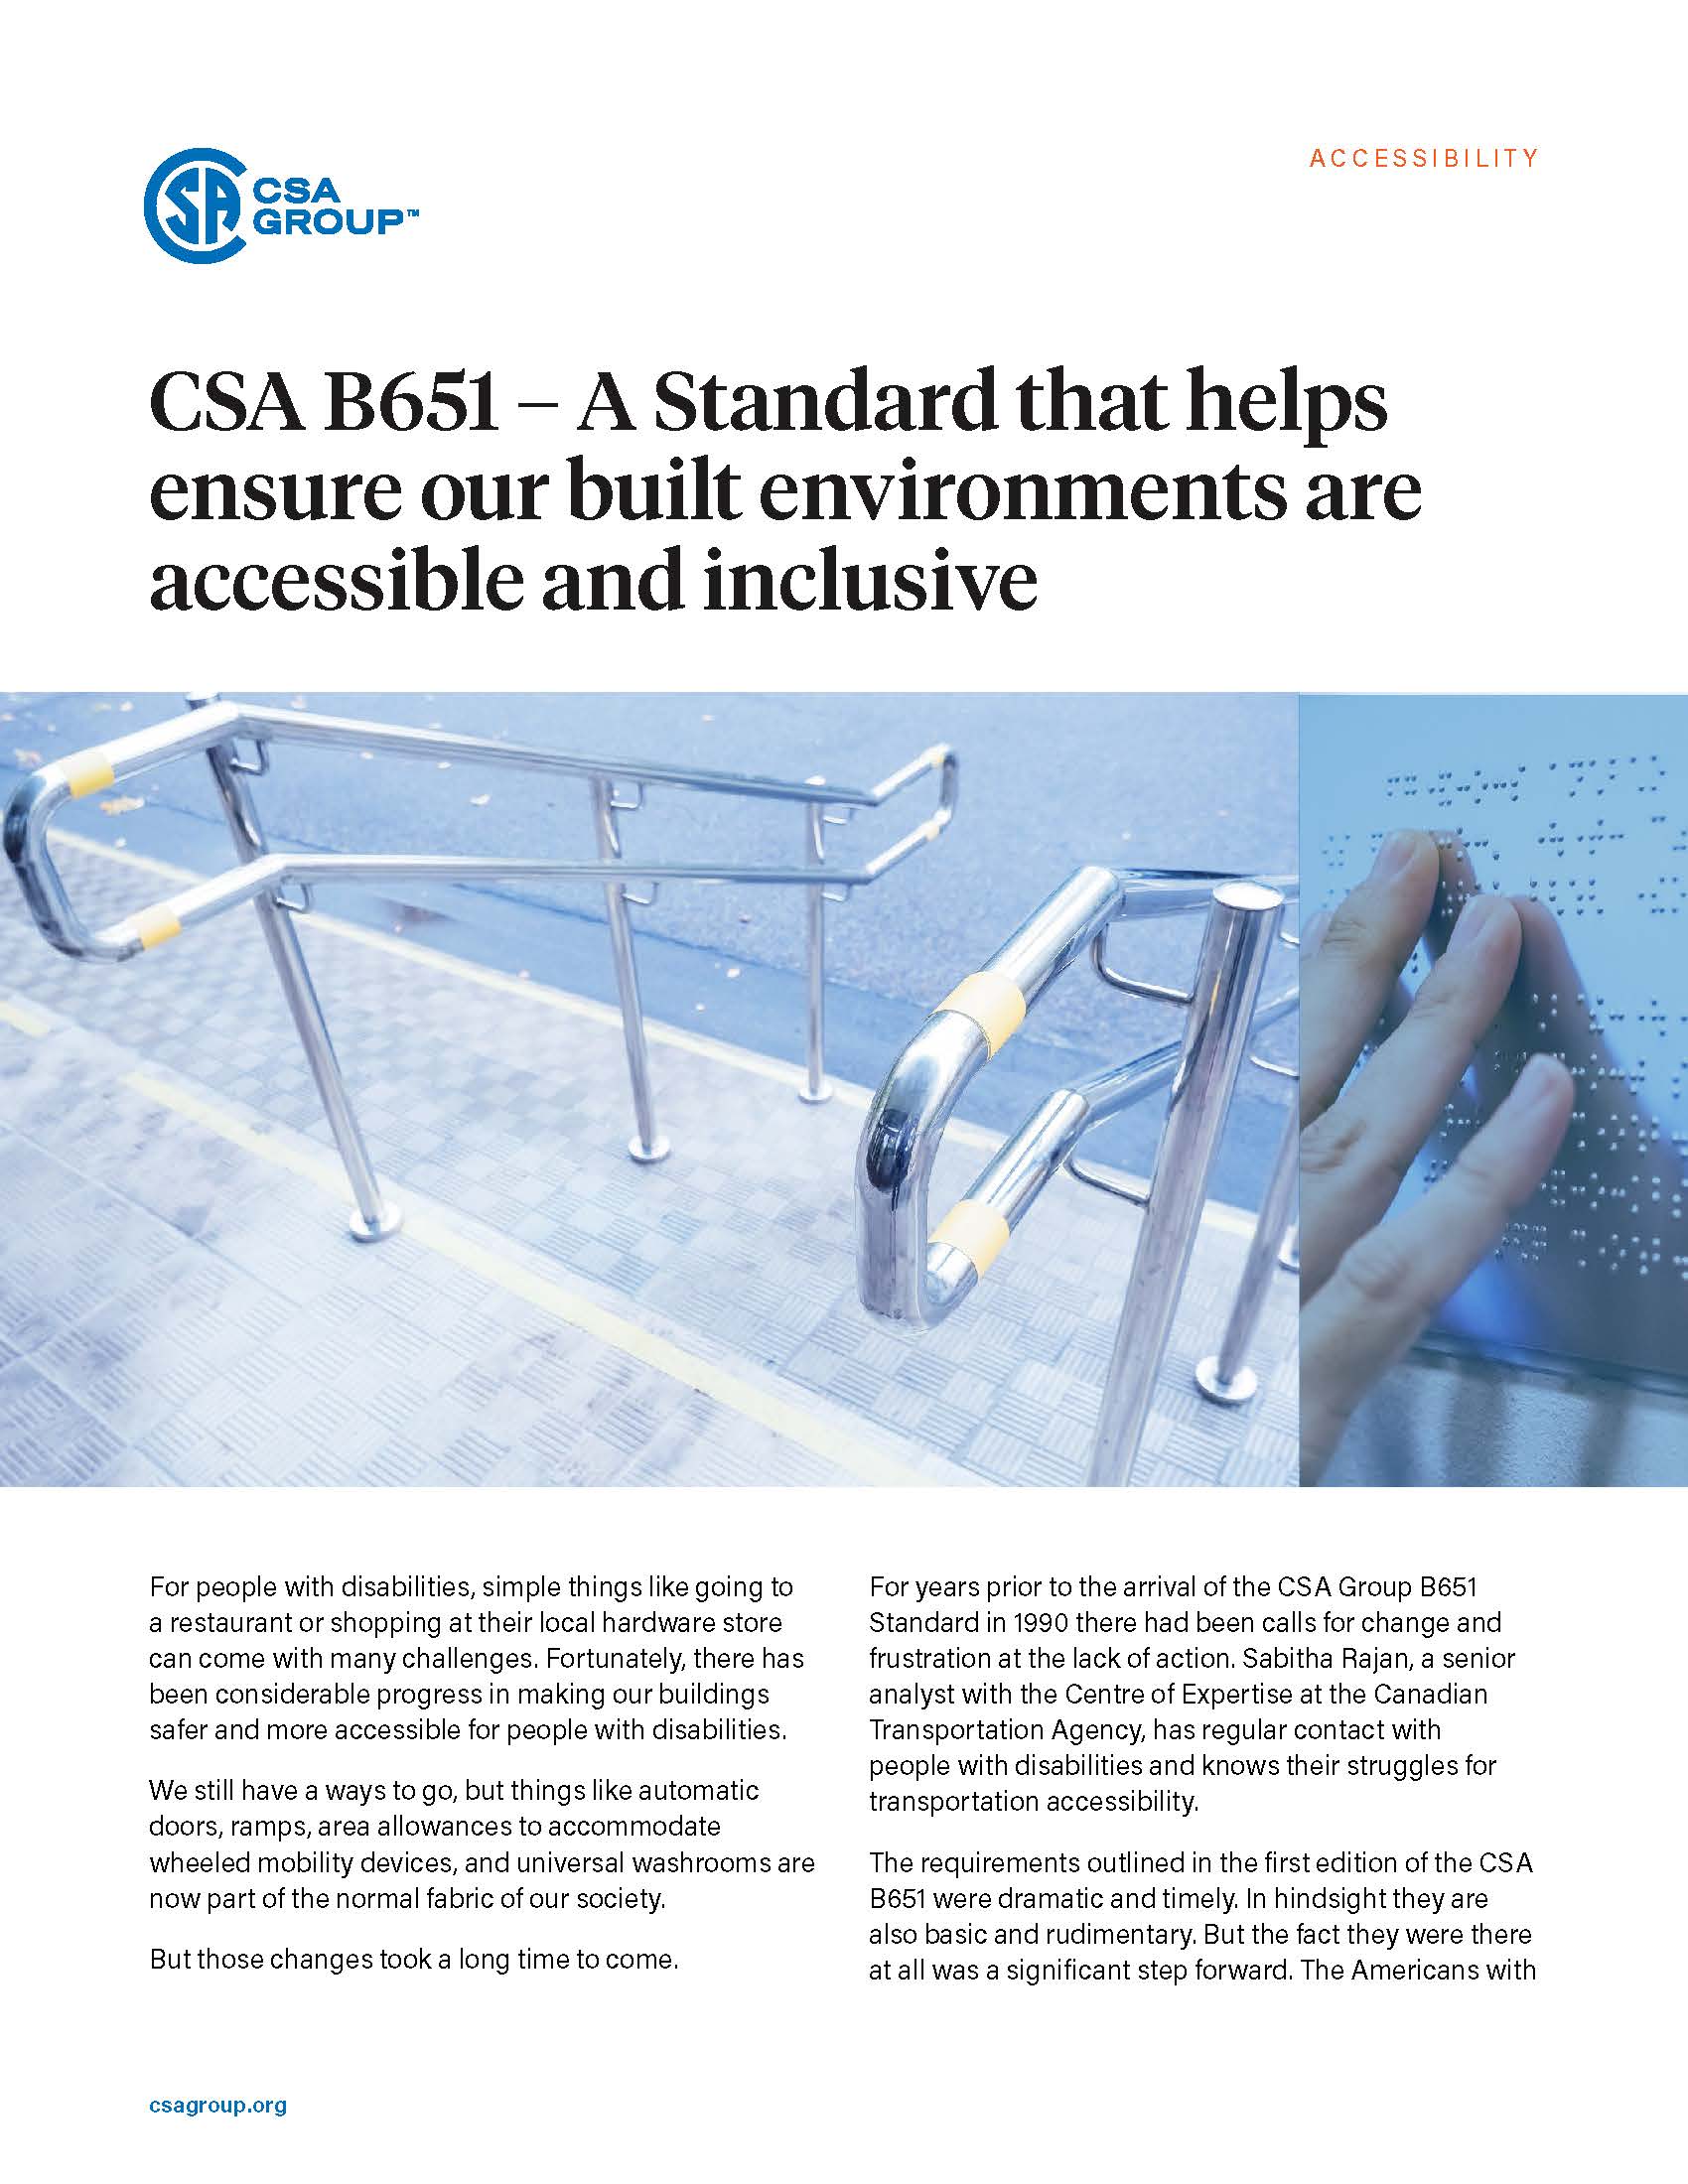 Title page of the case study “CSA B651 – A Standard that helps ensure our built environments are accessible and inclusive.